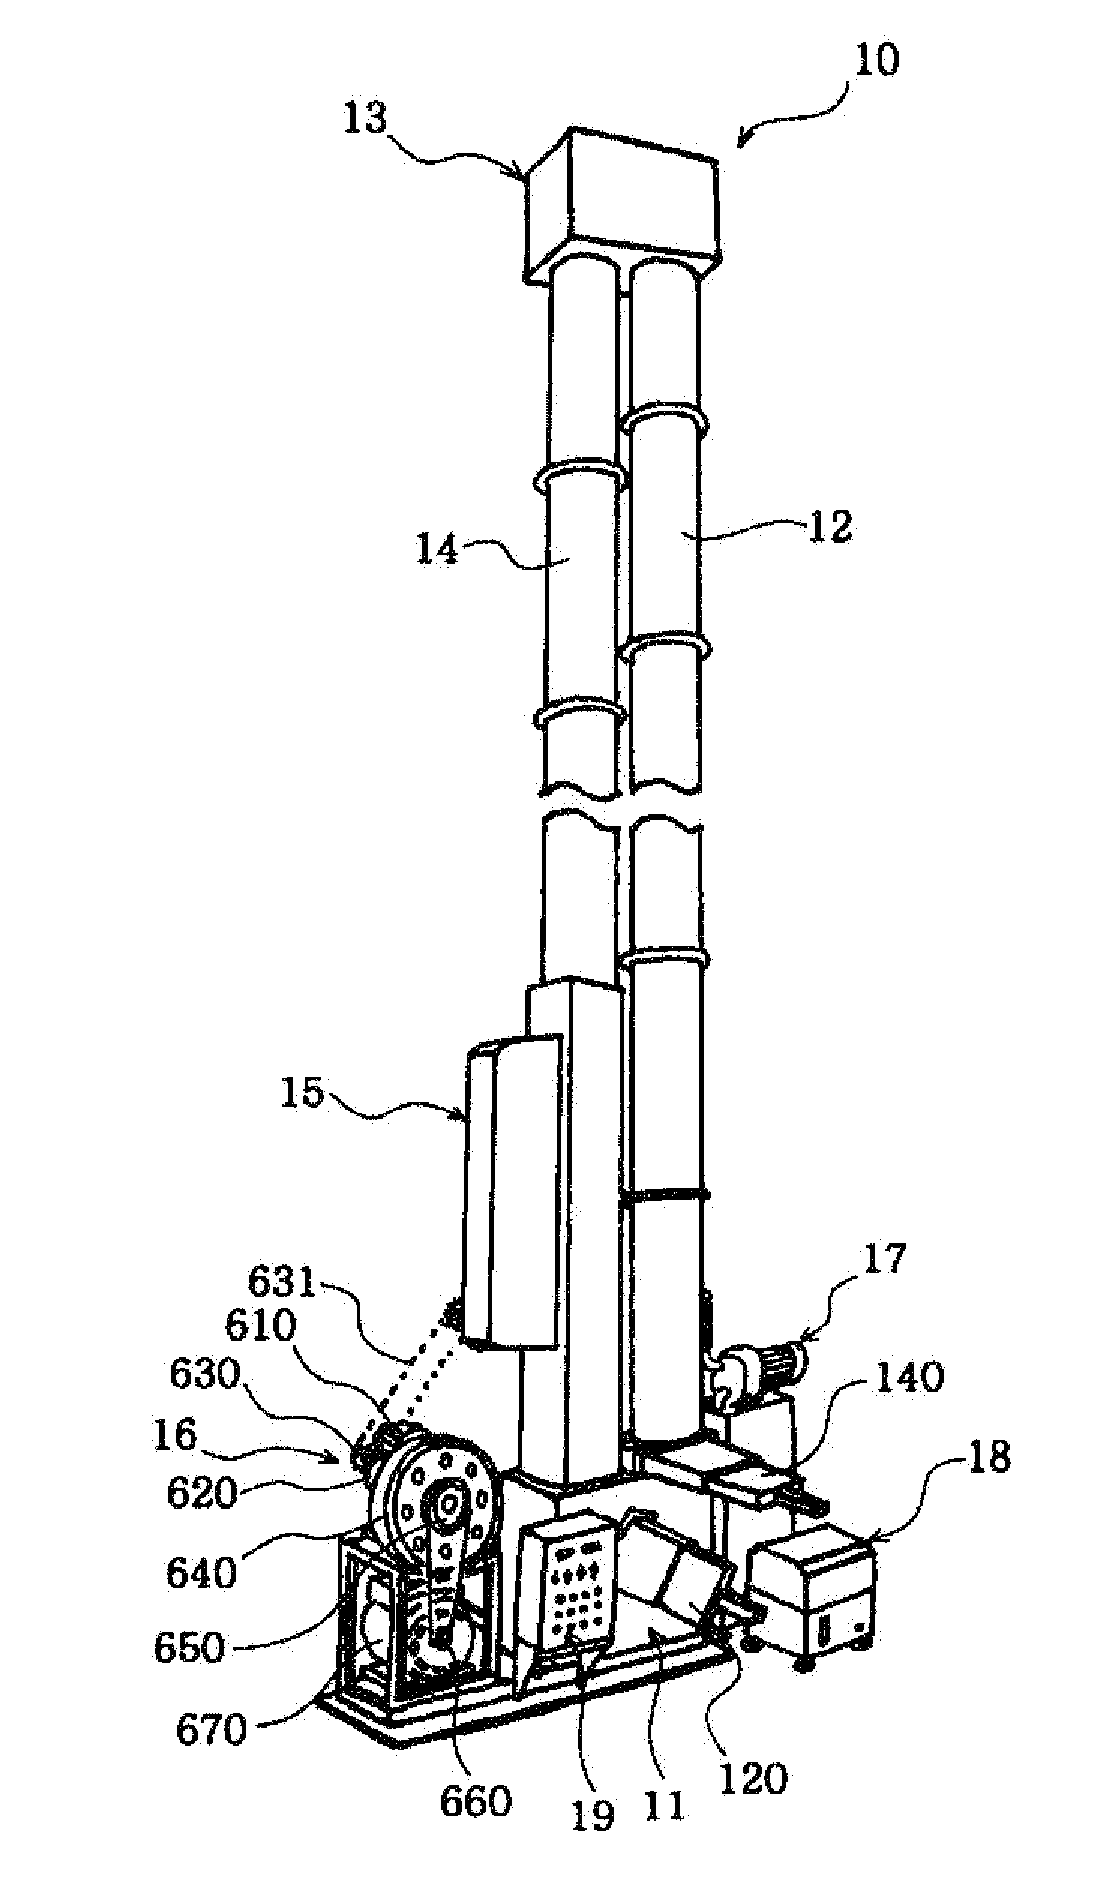 High efficiency energy production apparatus using potential energy